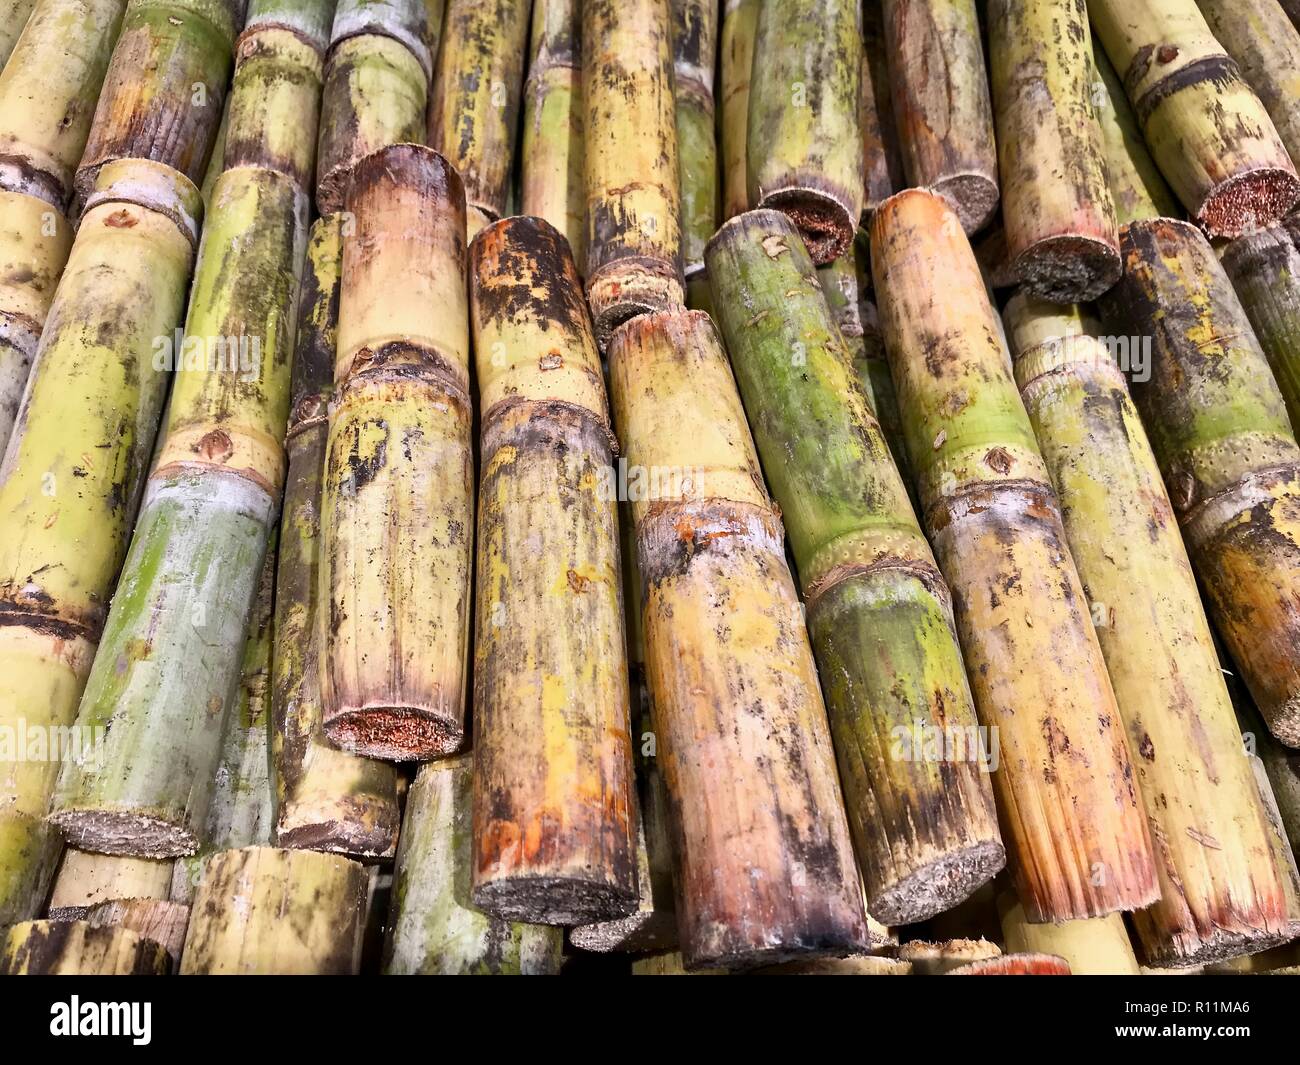 Fresh cut sugar cane in the Caribbean piled up for market Stock Photo